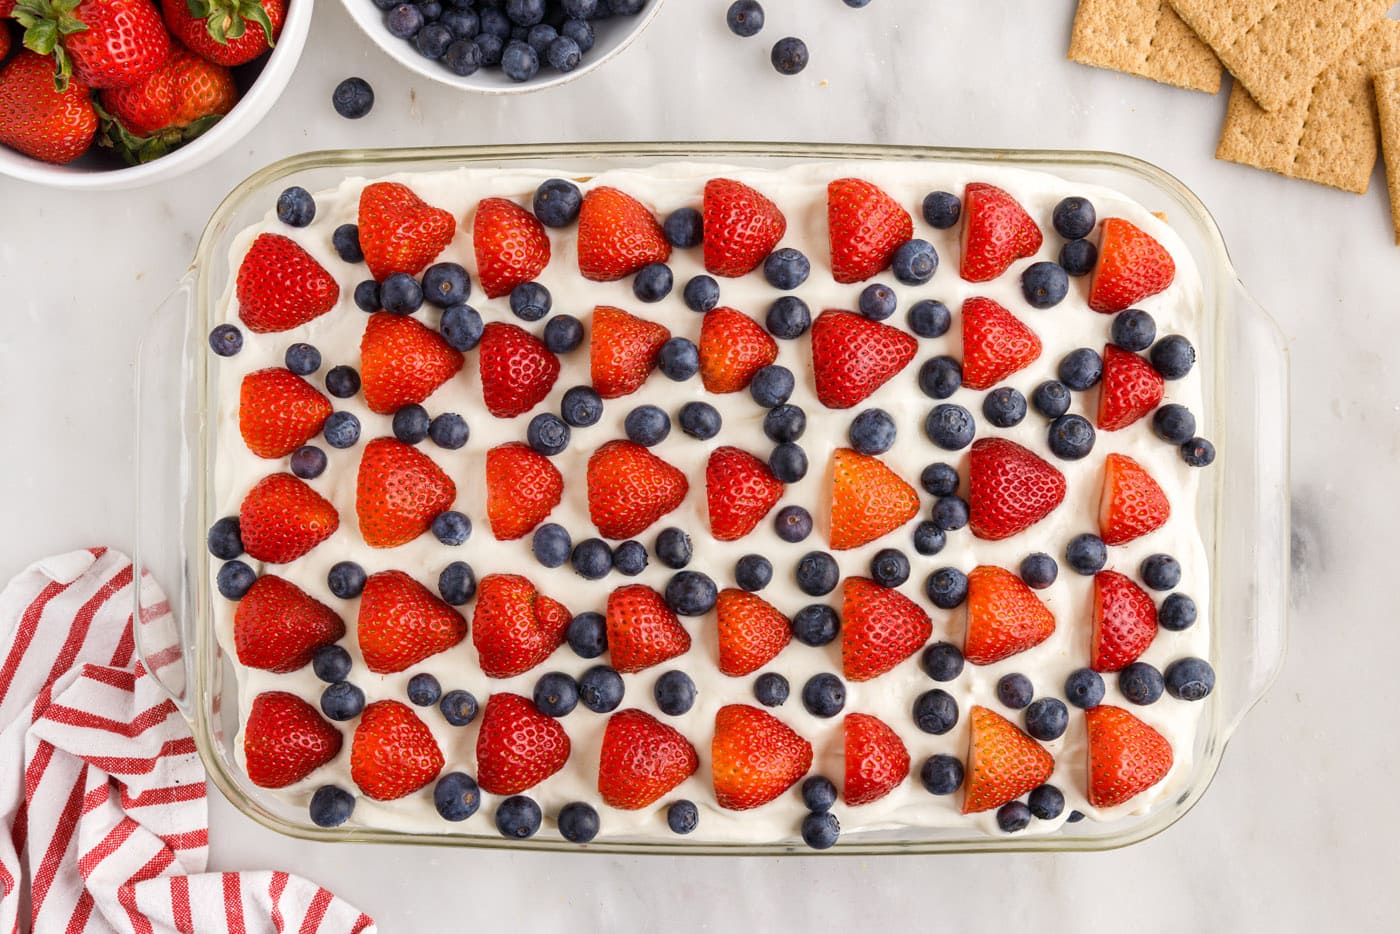 Strawberries and blueberries on top of the mixed berry icebox cake